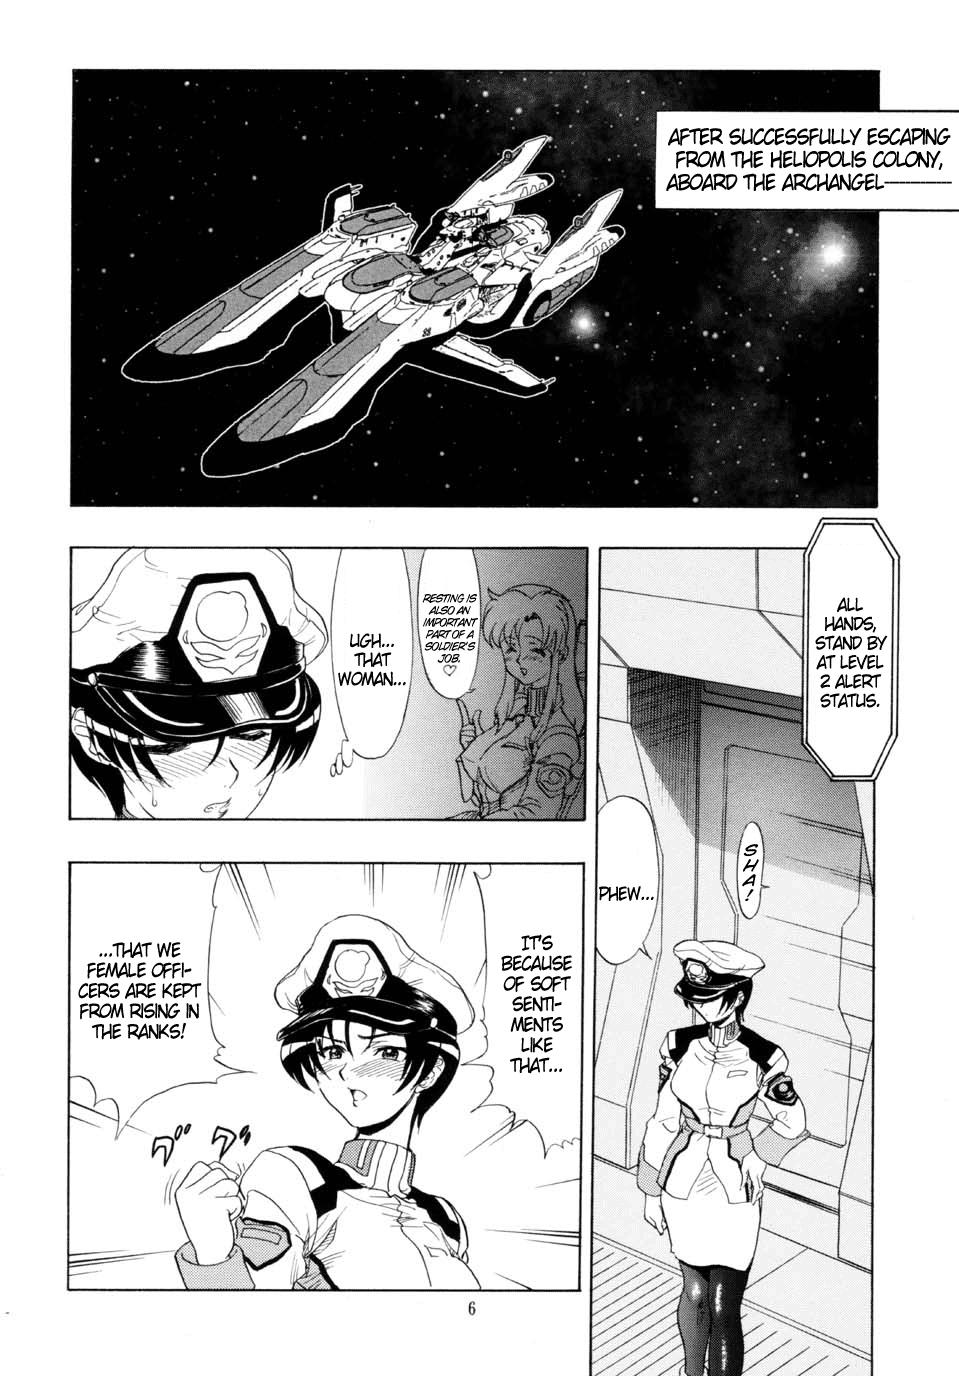 Amateurs Murrue to Natarle | Murrue and Natarle - Gundam seed 18 Year Old Porn - Page 6